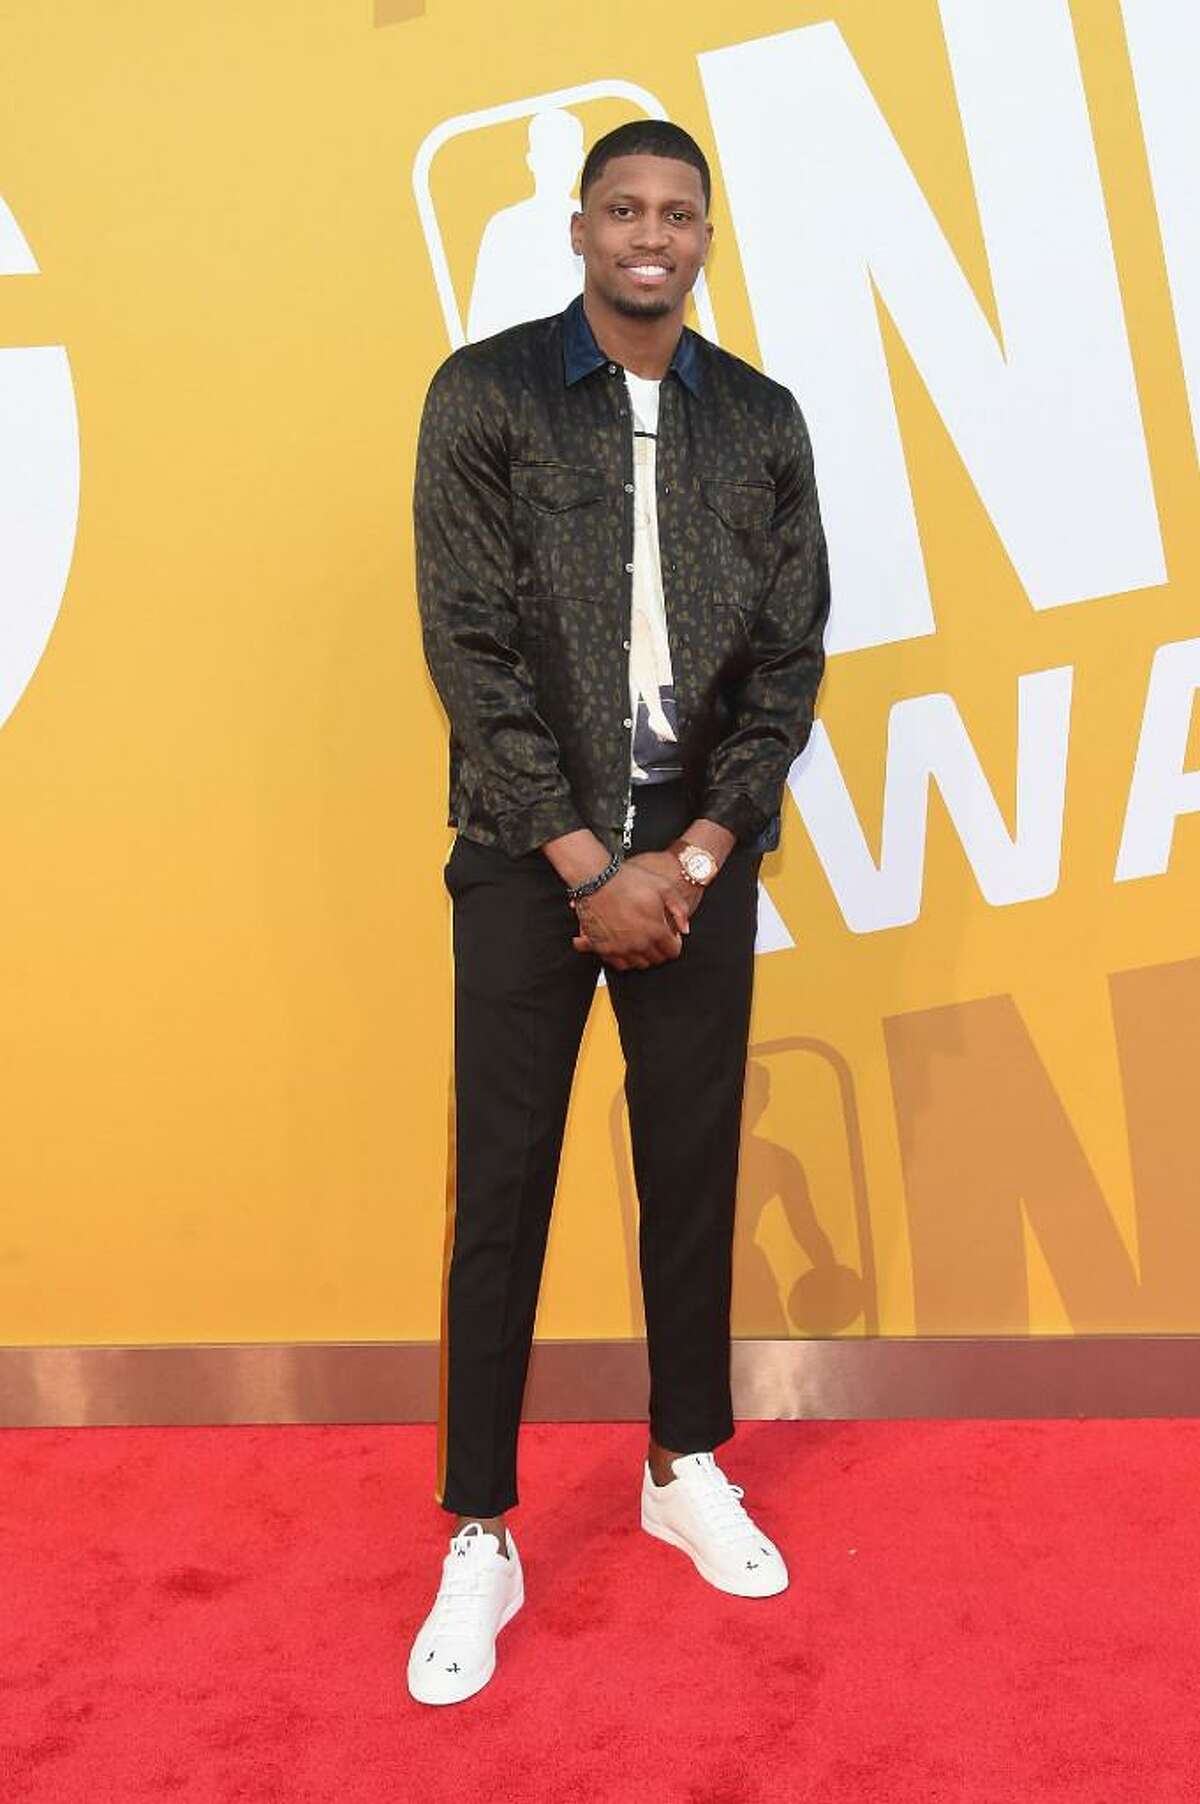 Rudy Gay attends the 2017 NBA Awards live on TNT on June 26, 2017 in New York, New York.